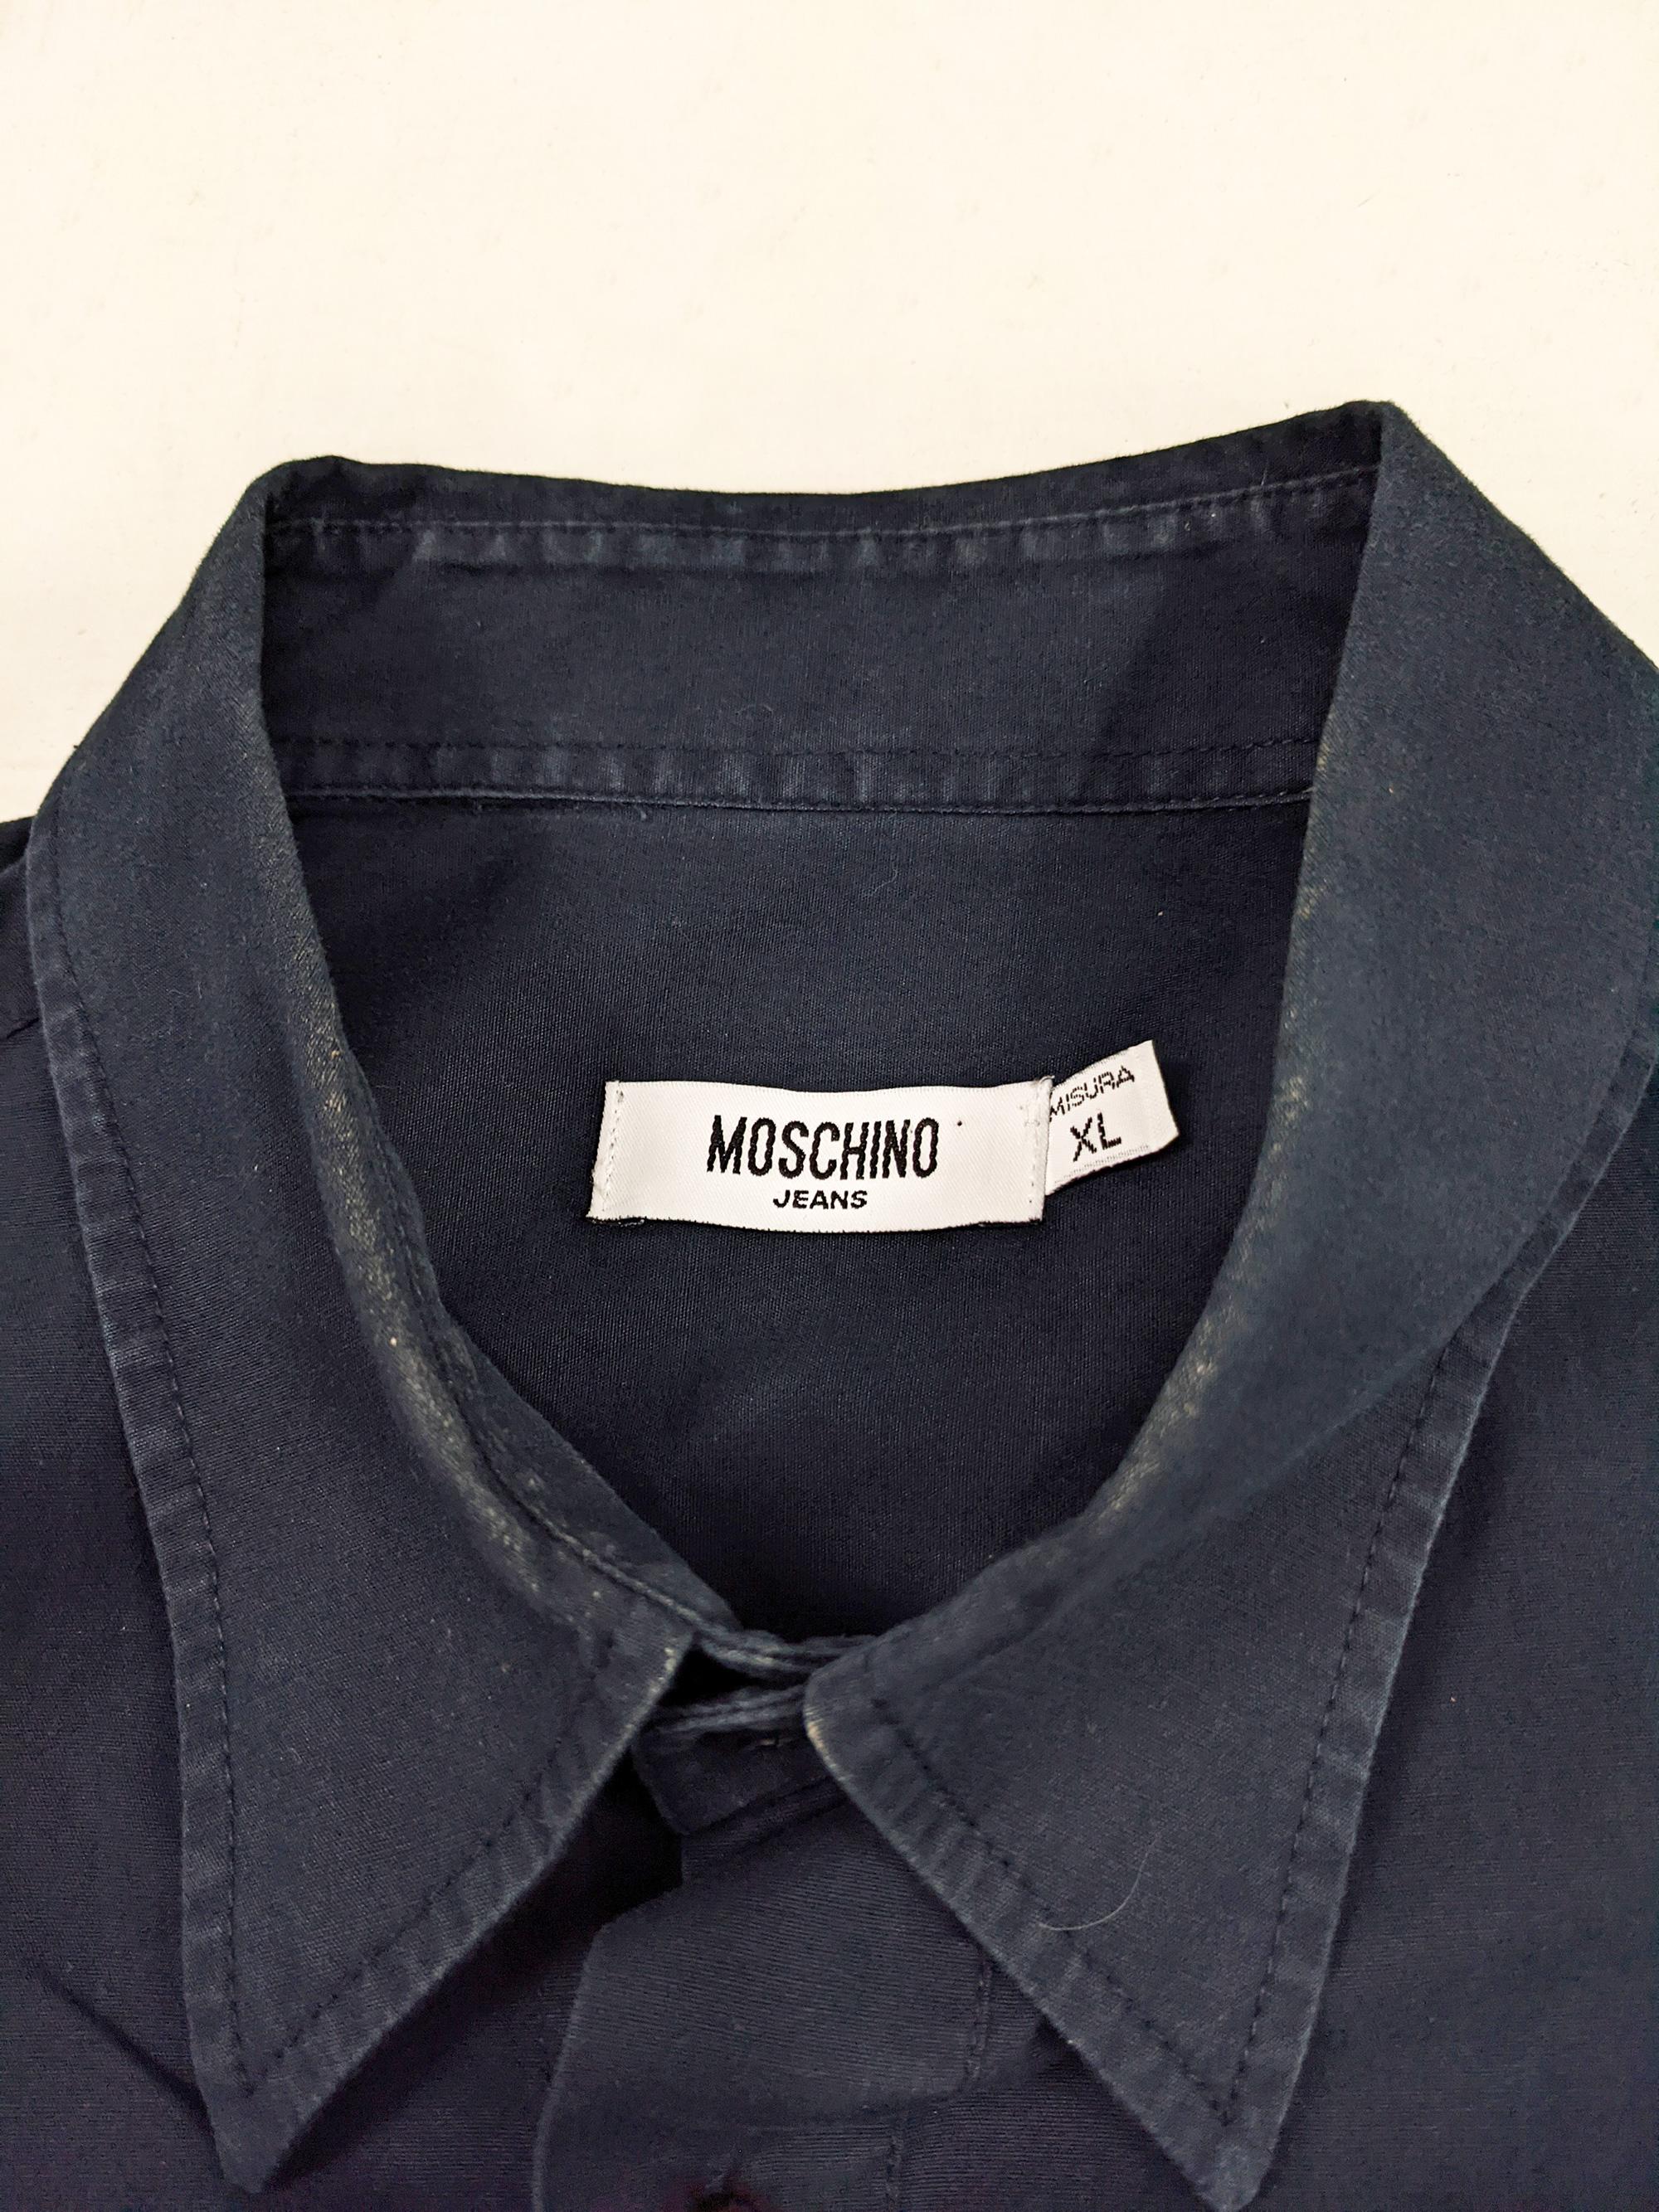 Moschino Vintage Navy Blue & Red Shirt 1990s Long Sleeve Shirt Buttoned Shirt For Sale 3